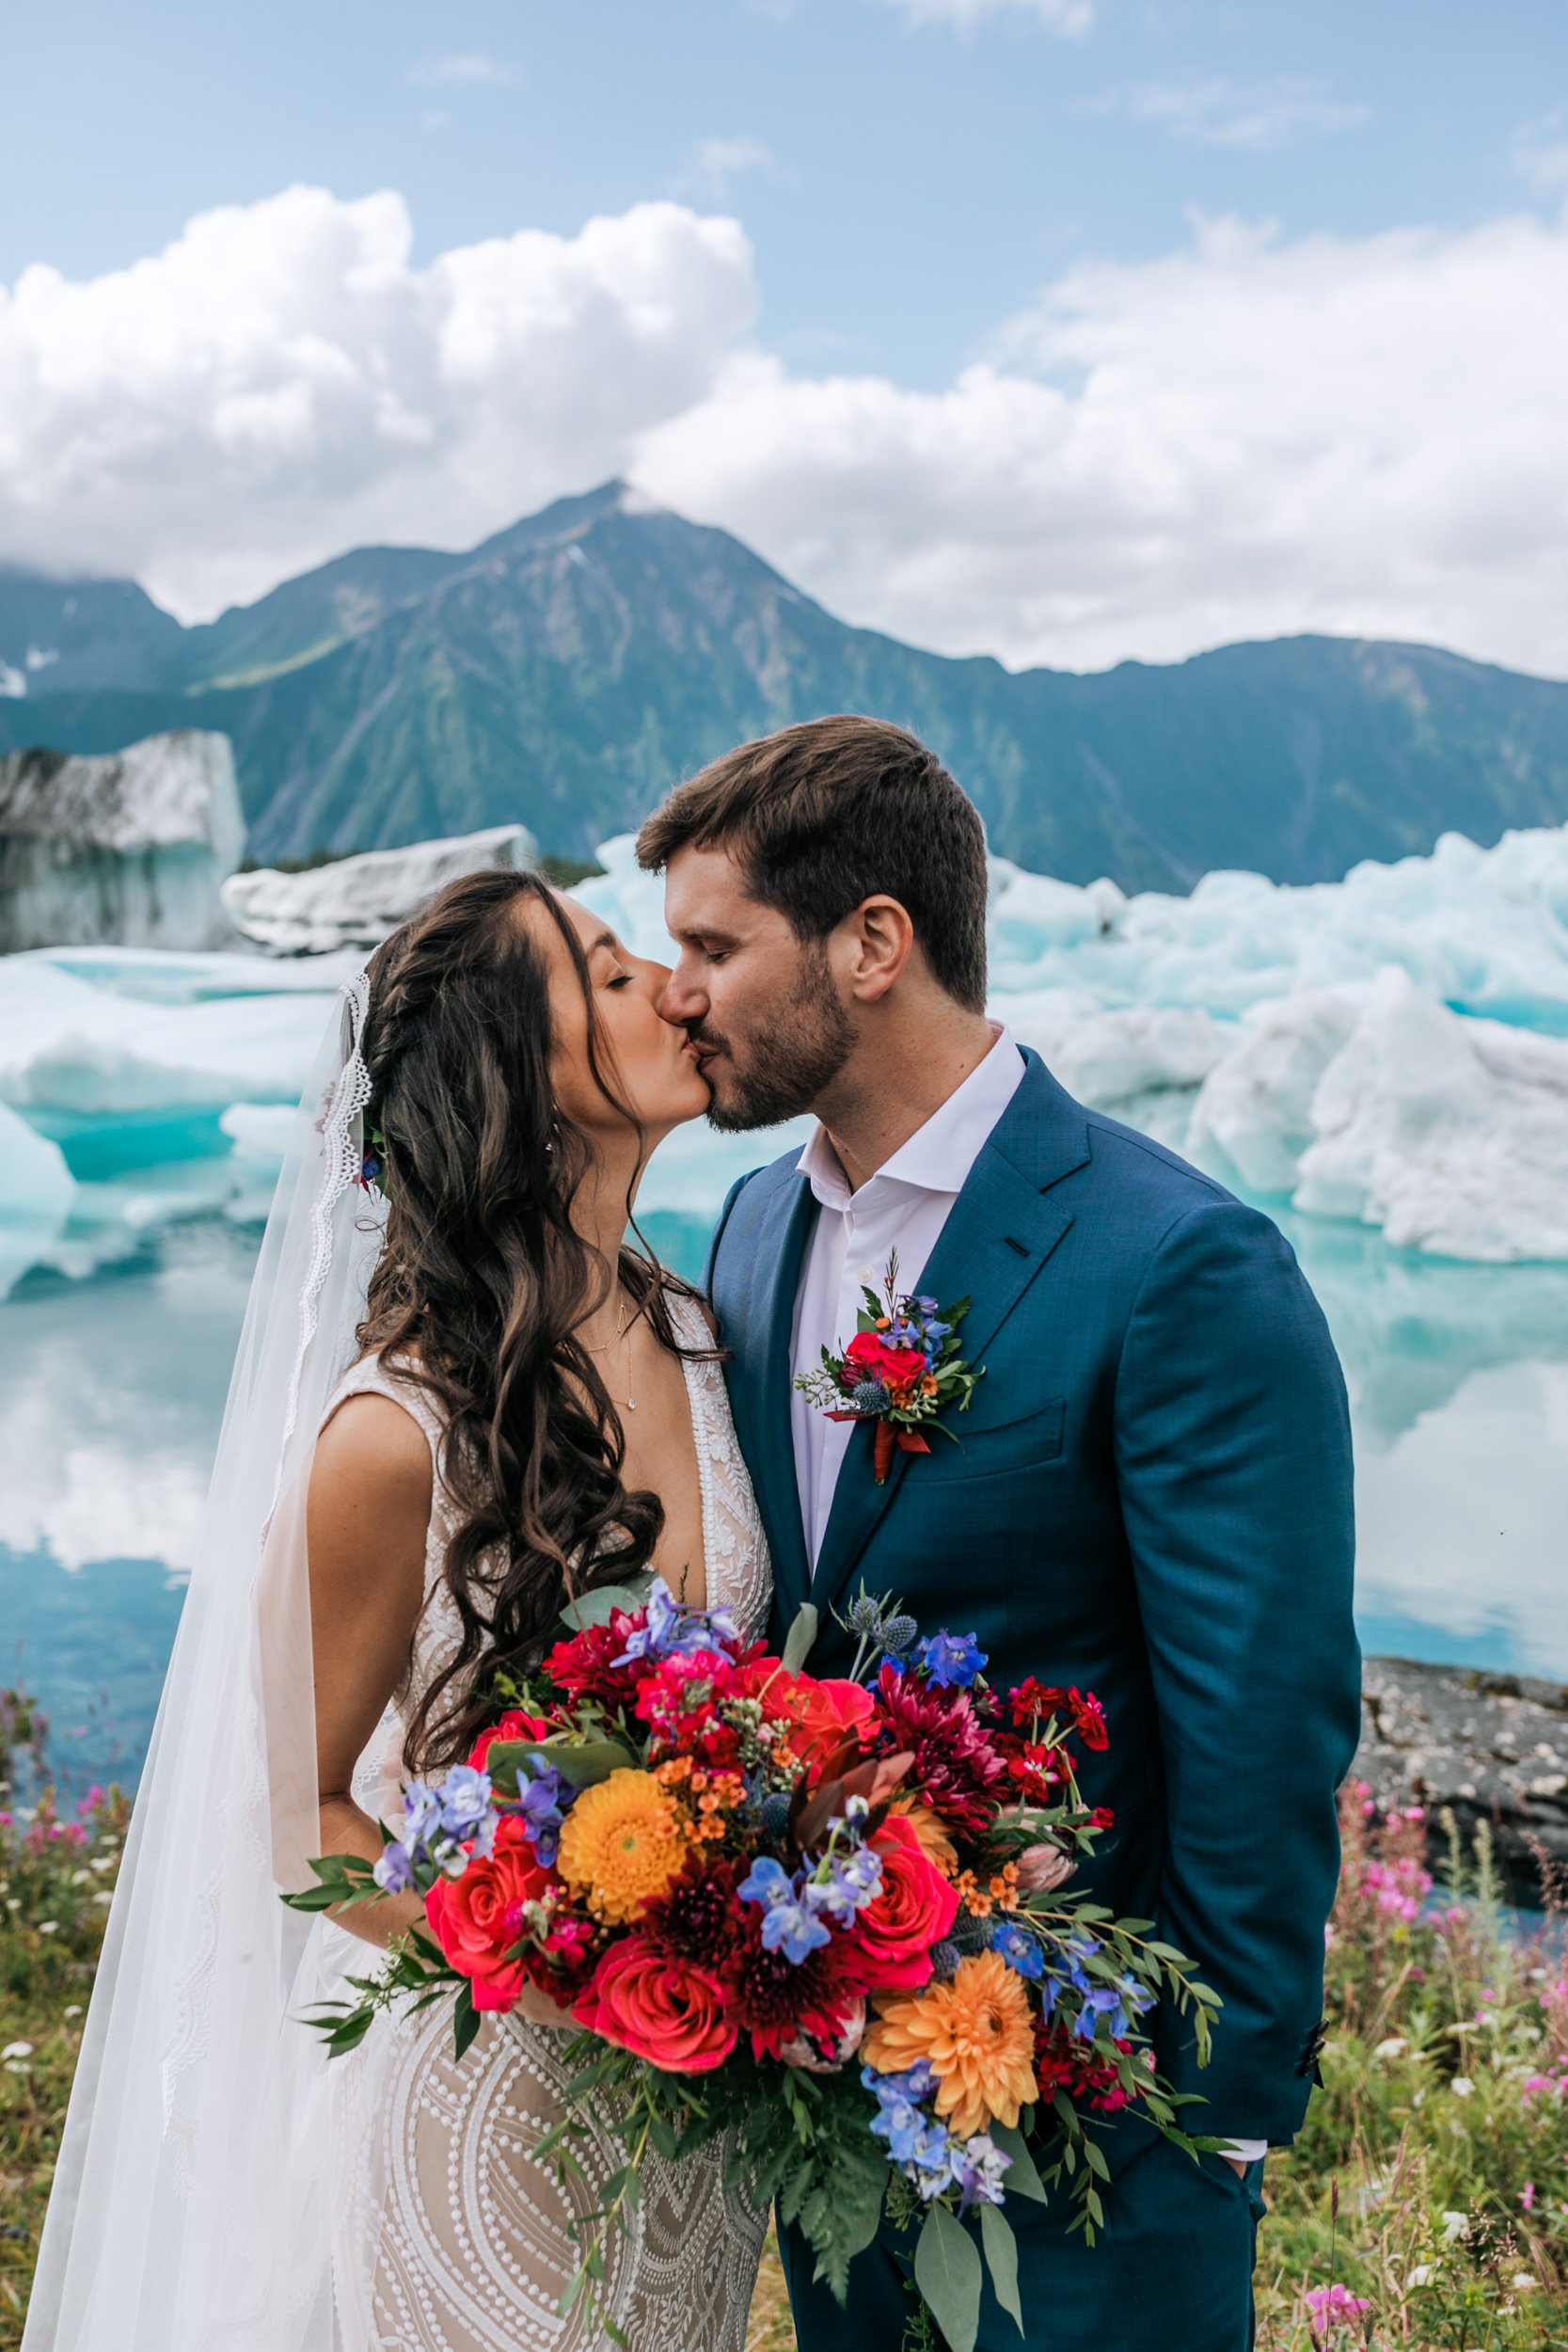 Alaska Kayaking with Icebergs Packrafting Elopement with in Kenai Fjords National Park | The Hearnes Adventure Photography